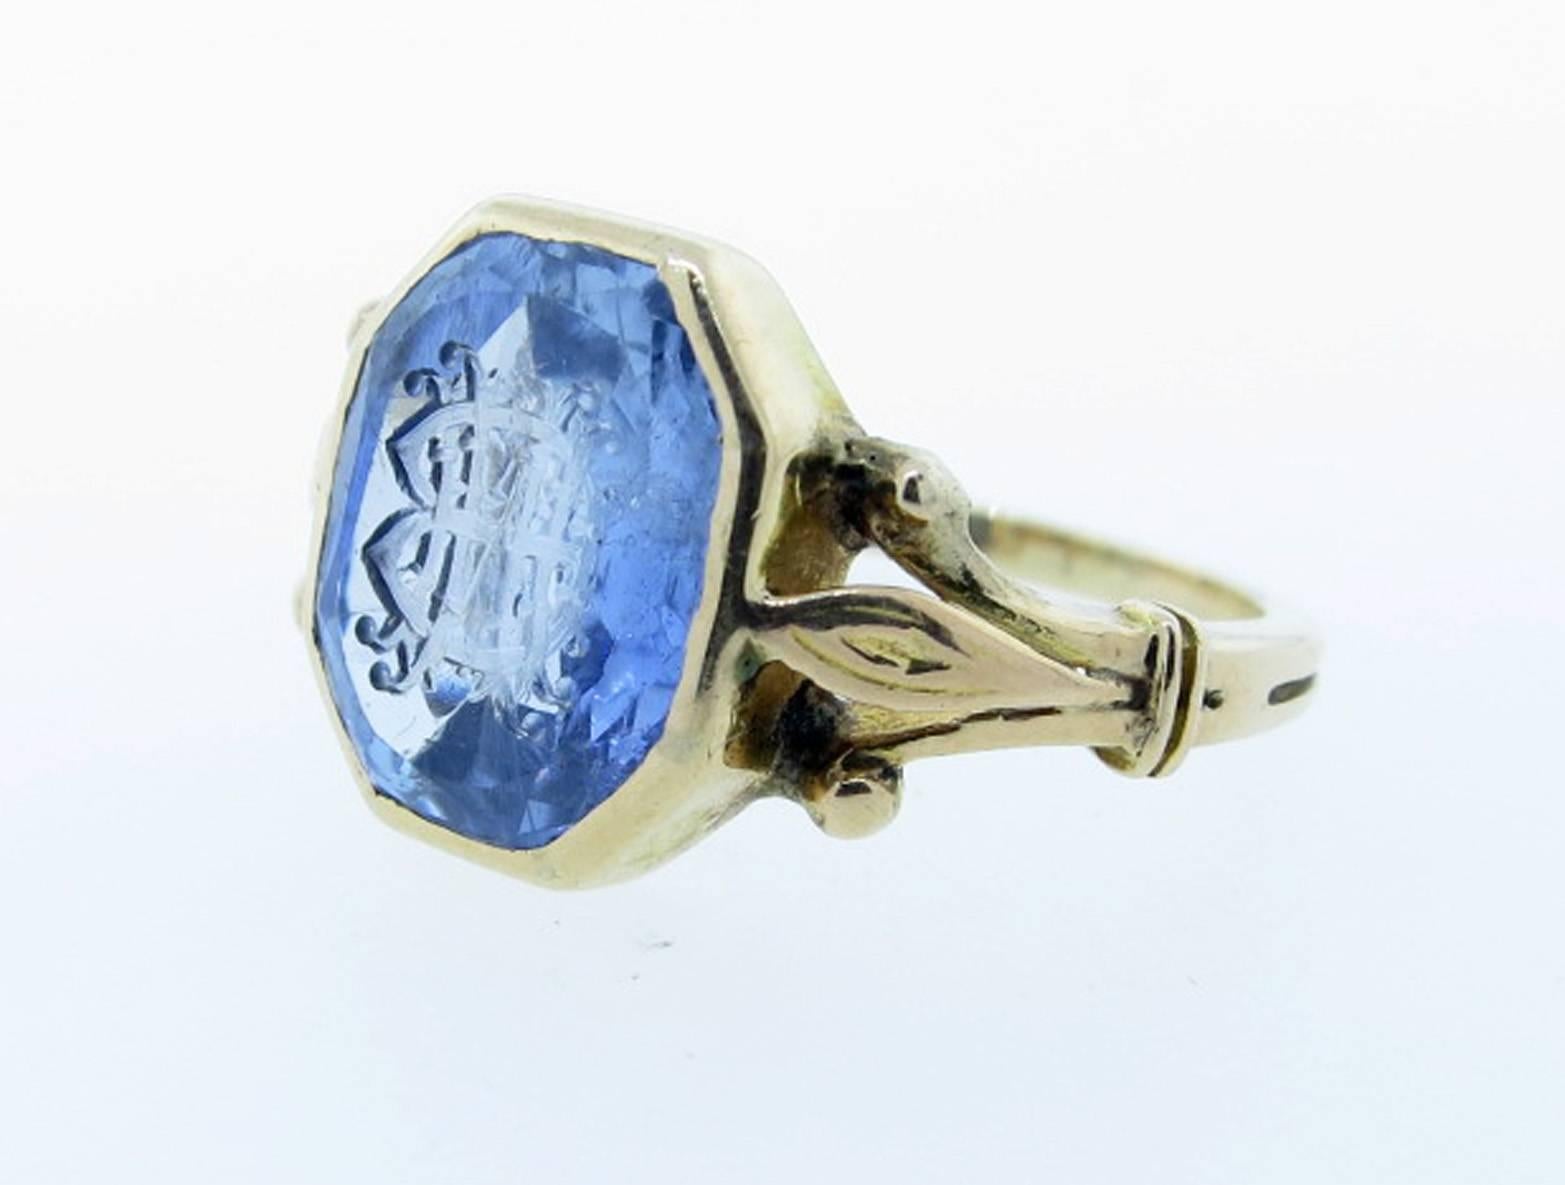 Unique antique octagonal faceted and carved natural ceylon sapphire signet ring. The sapphire weighs approx 5.0 cts. and is carved with initials which are open to interpretation. The mount is 14kt. yellow gold with pink gold accents. Size 7 1/2 and